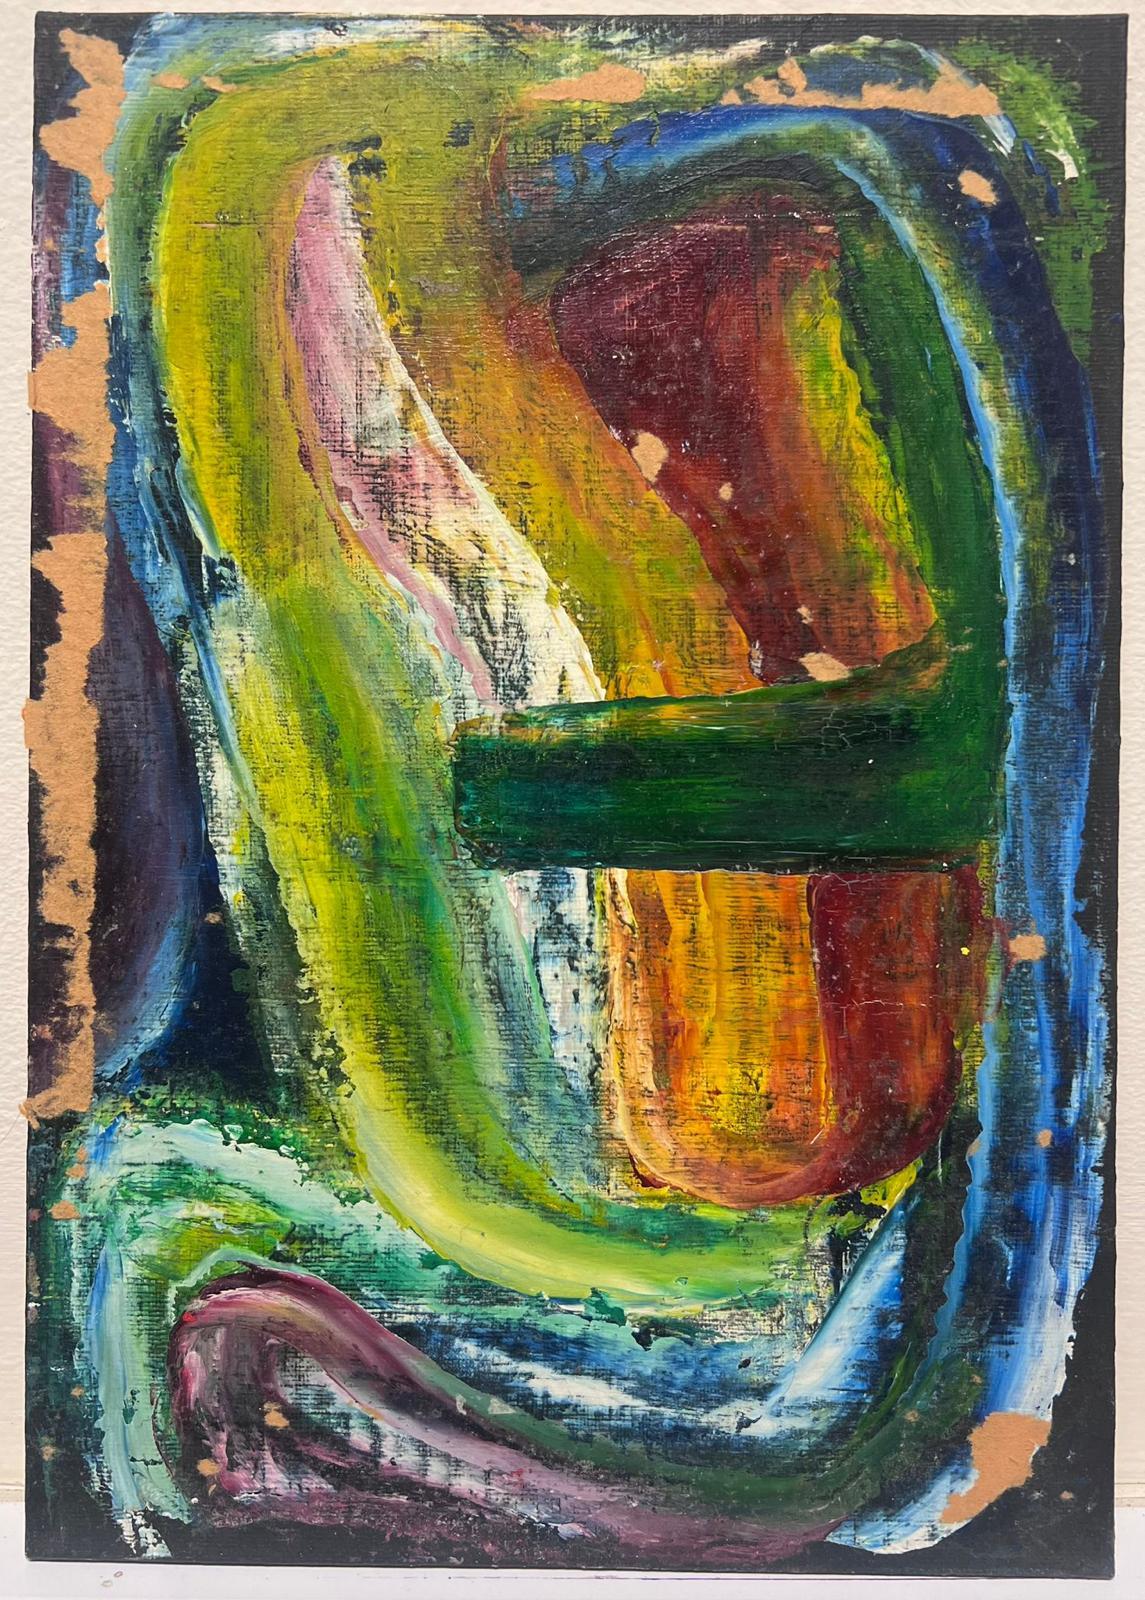 Abstract Expressionist Composition
by Jacques COULAIS (1955-2011)
oil painting on board
unframed: 11 x 7.5 inches
condition: excellent
provenance: all the paintings we have for sale by this artist have come from the artists studio and are all